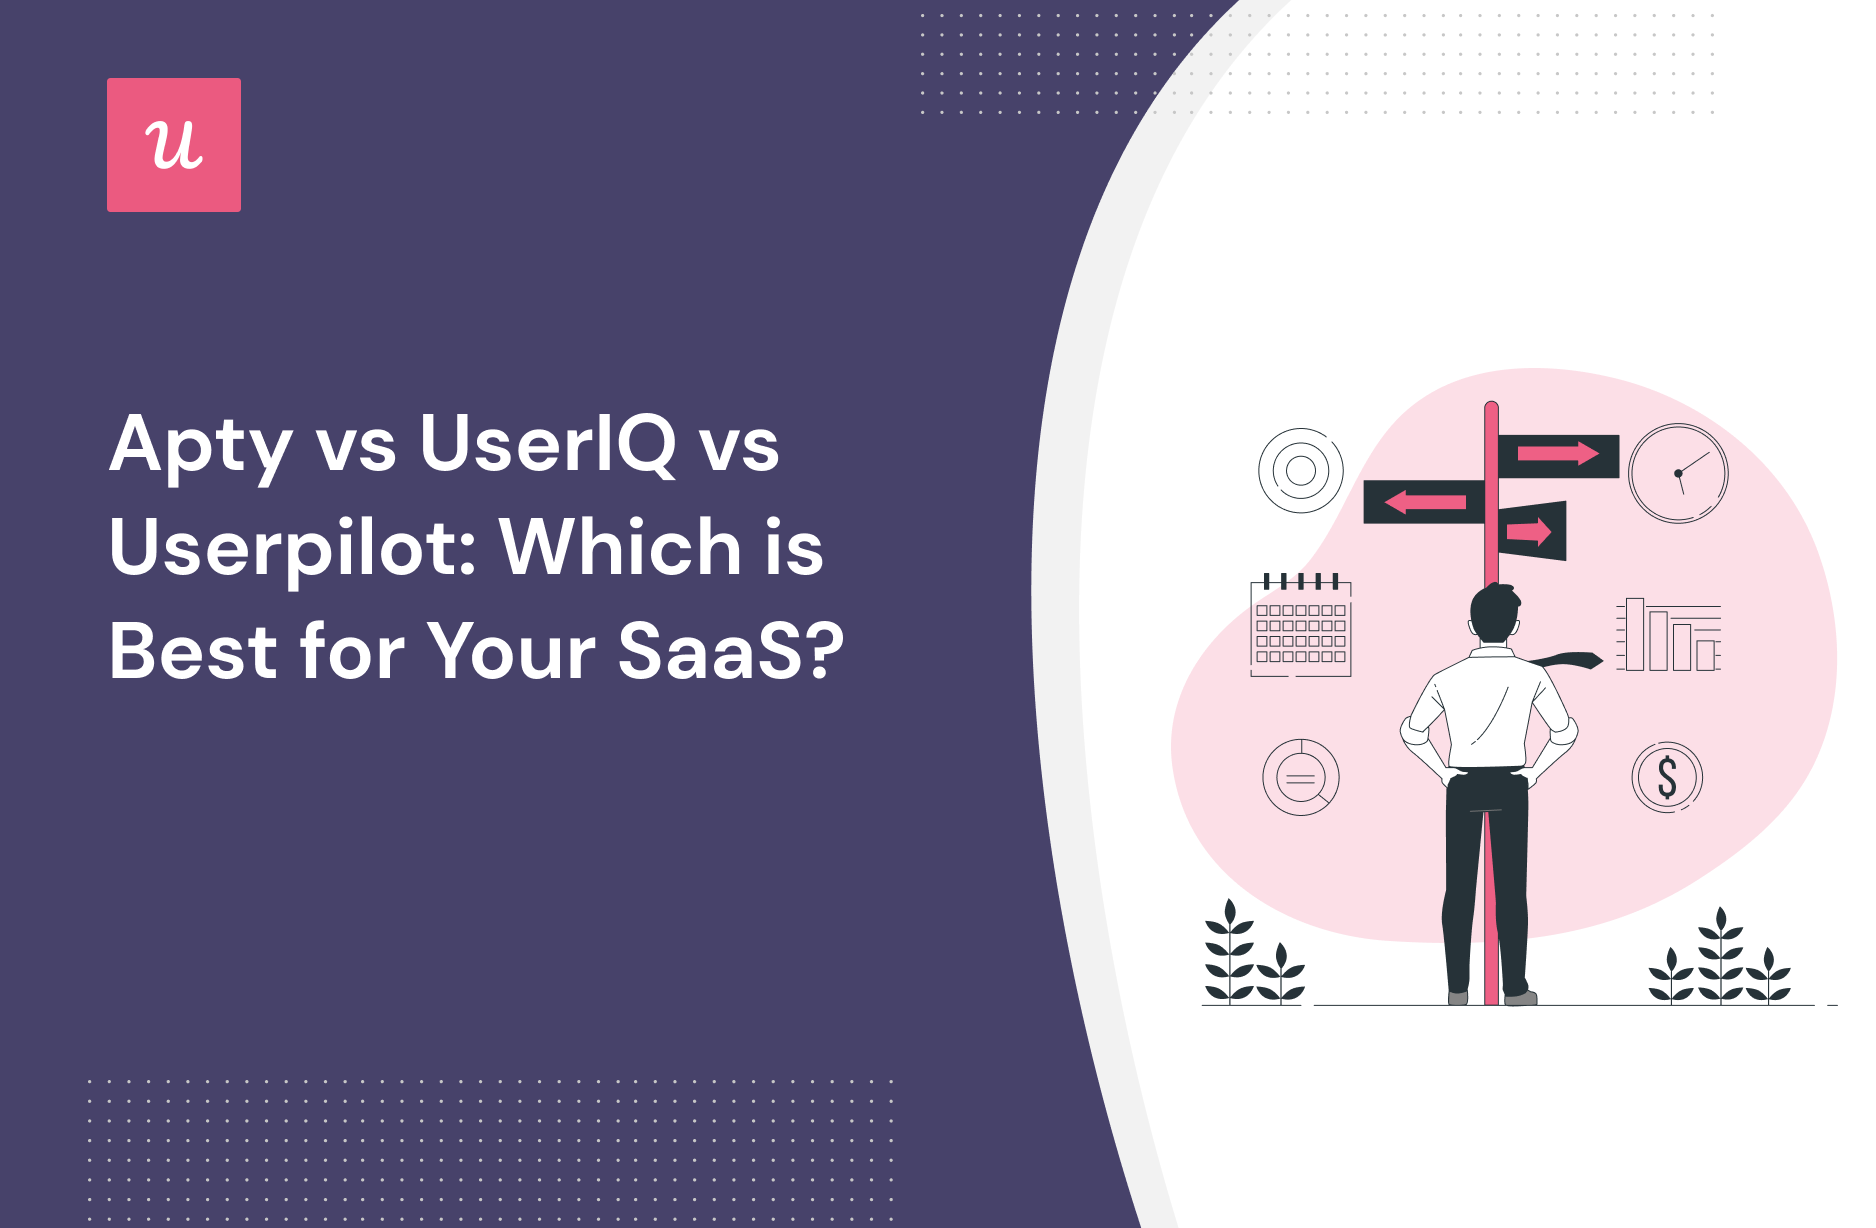 Apty vs UserIQ vs Userpilot: Which is Best for Your SaaS?